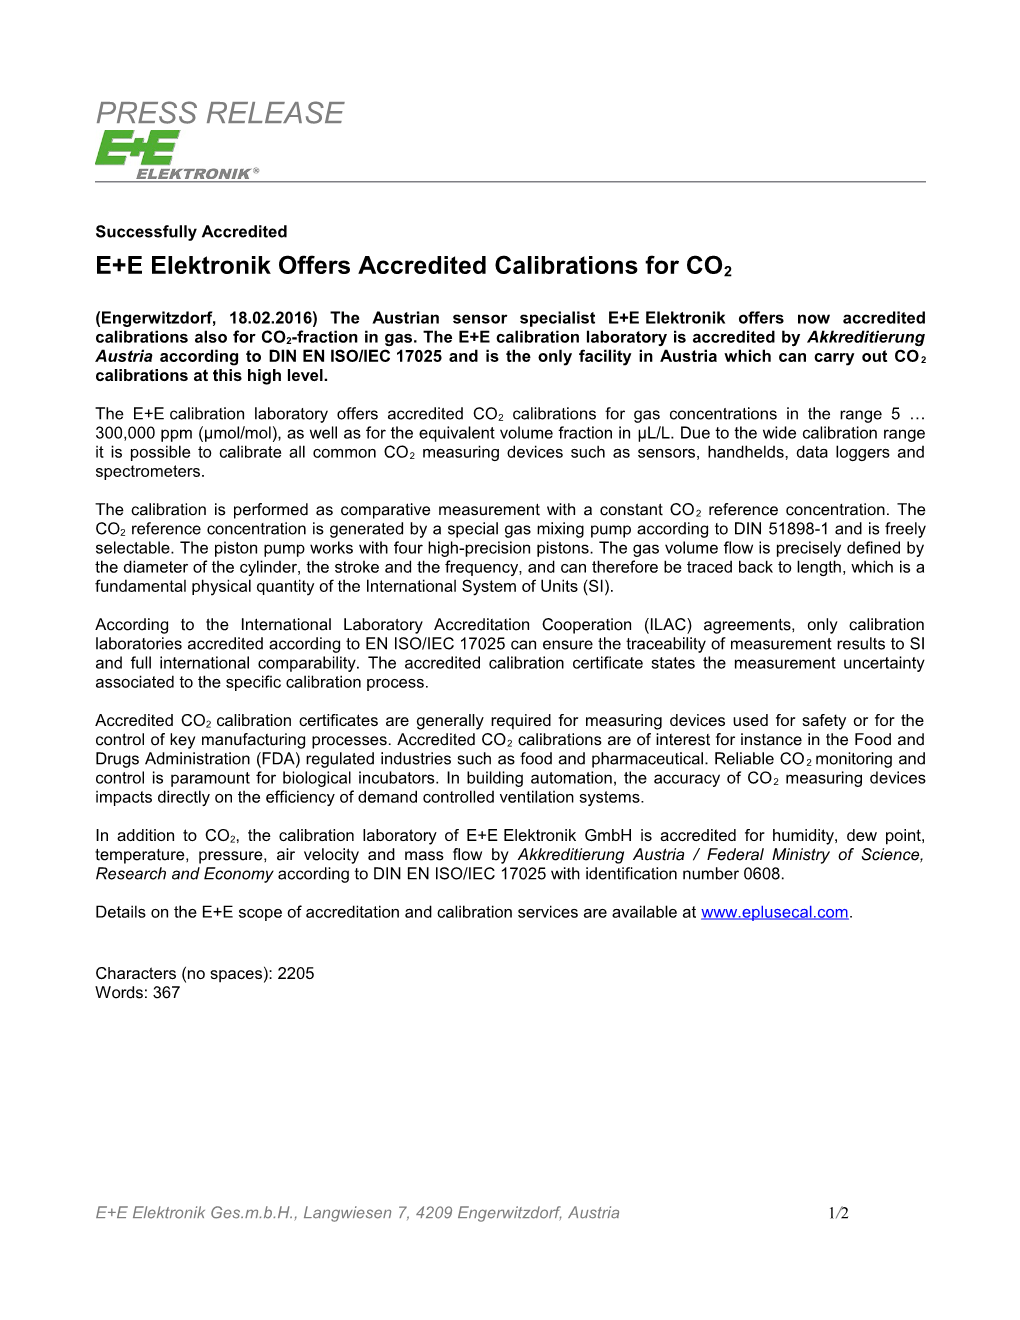 E+Eelektronik Offers Accredited Calibrations for CO2